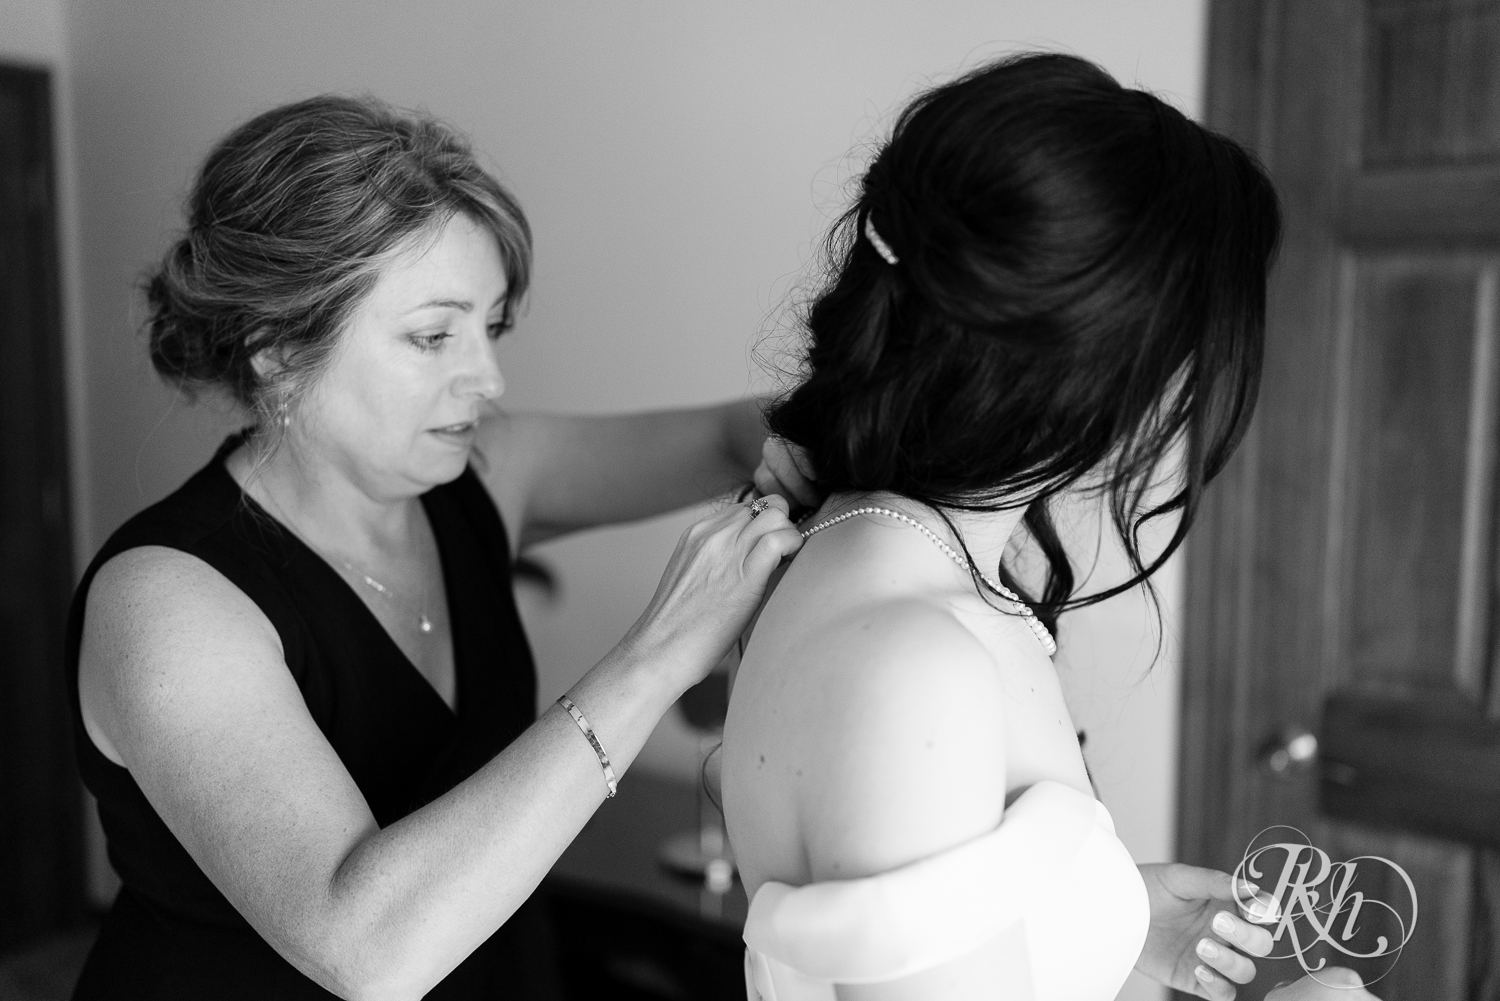 Mom put's necklace on a bride on her wedding day.